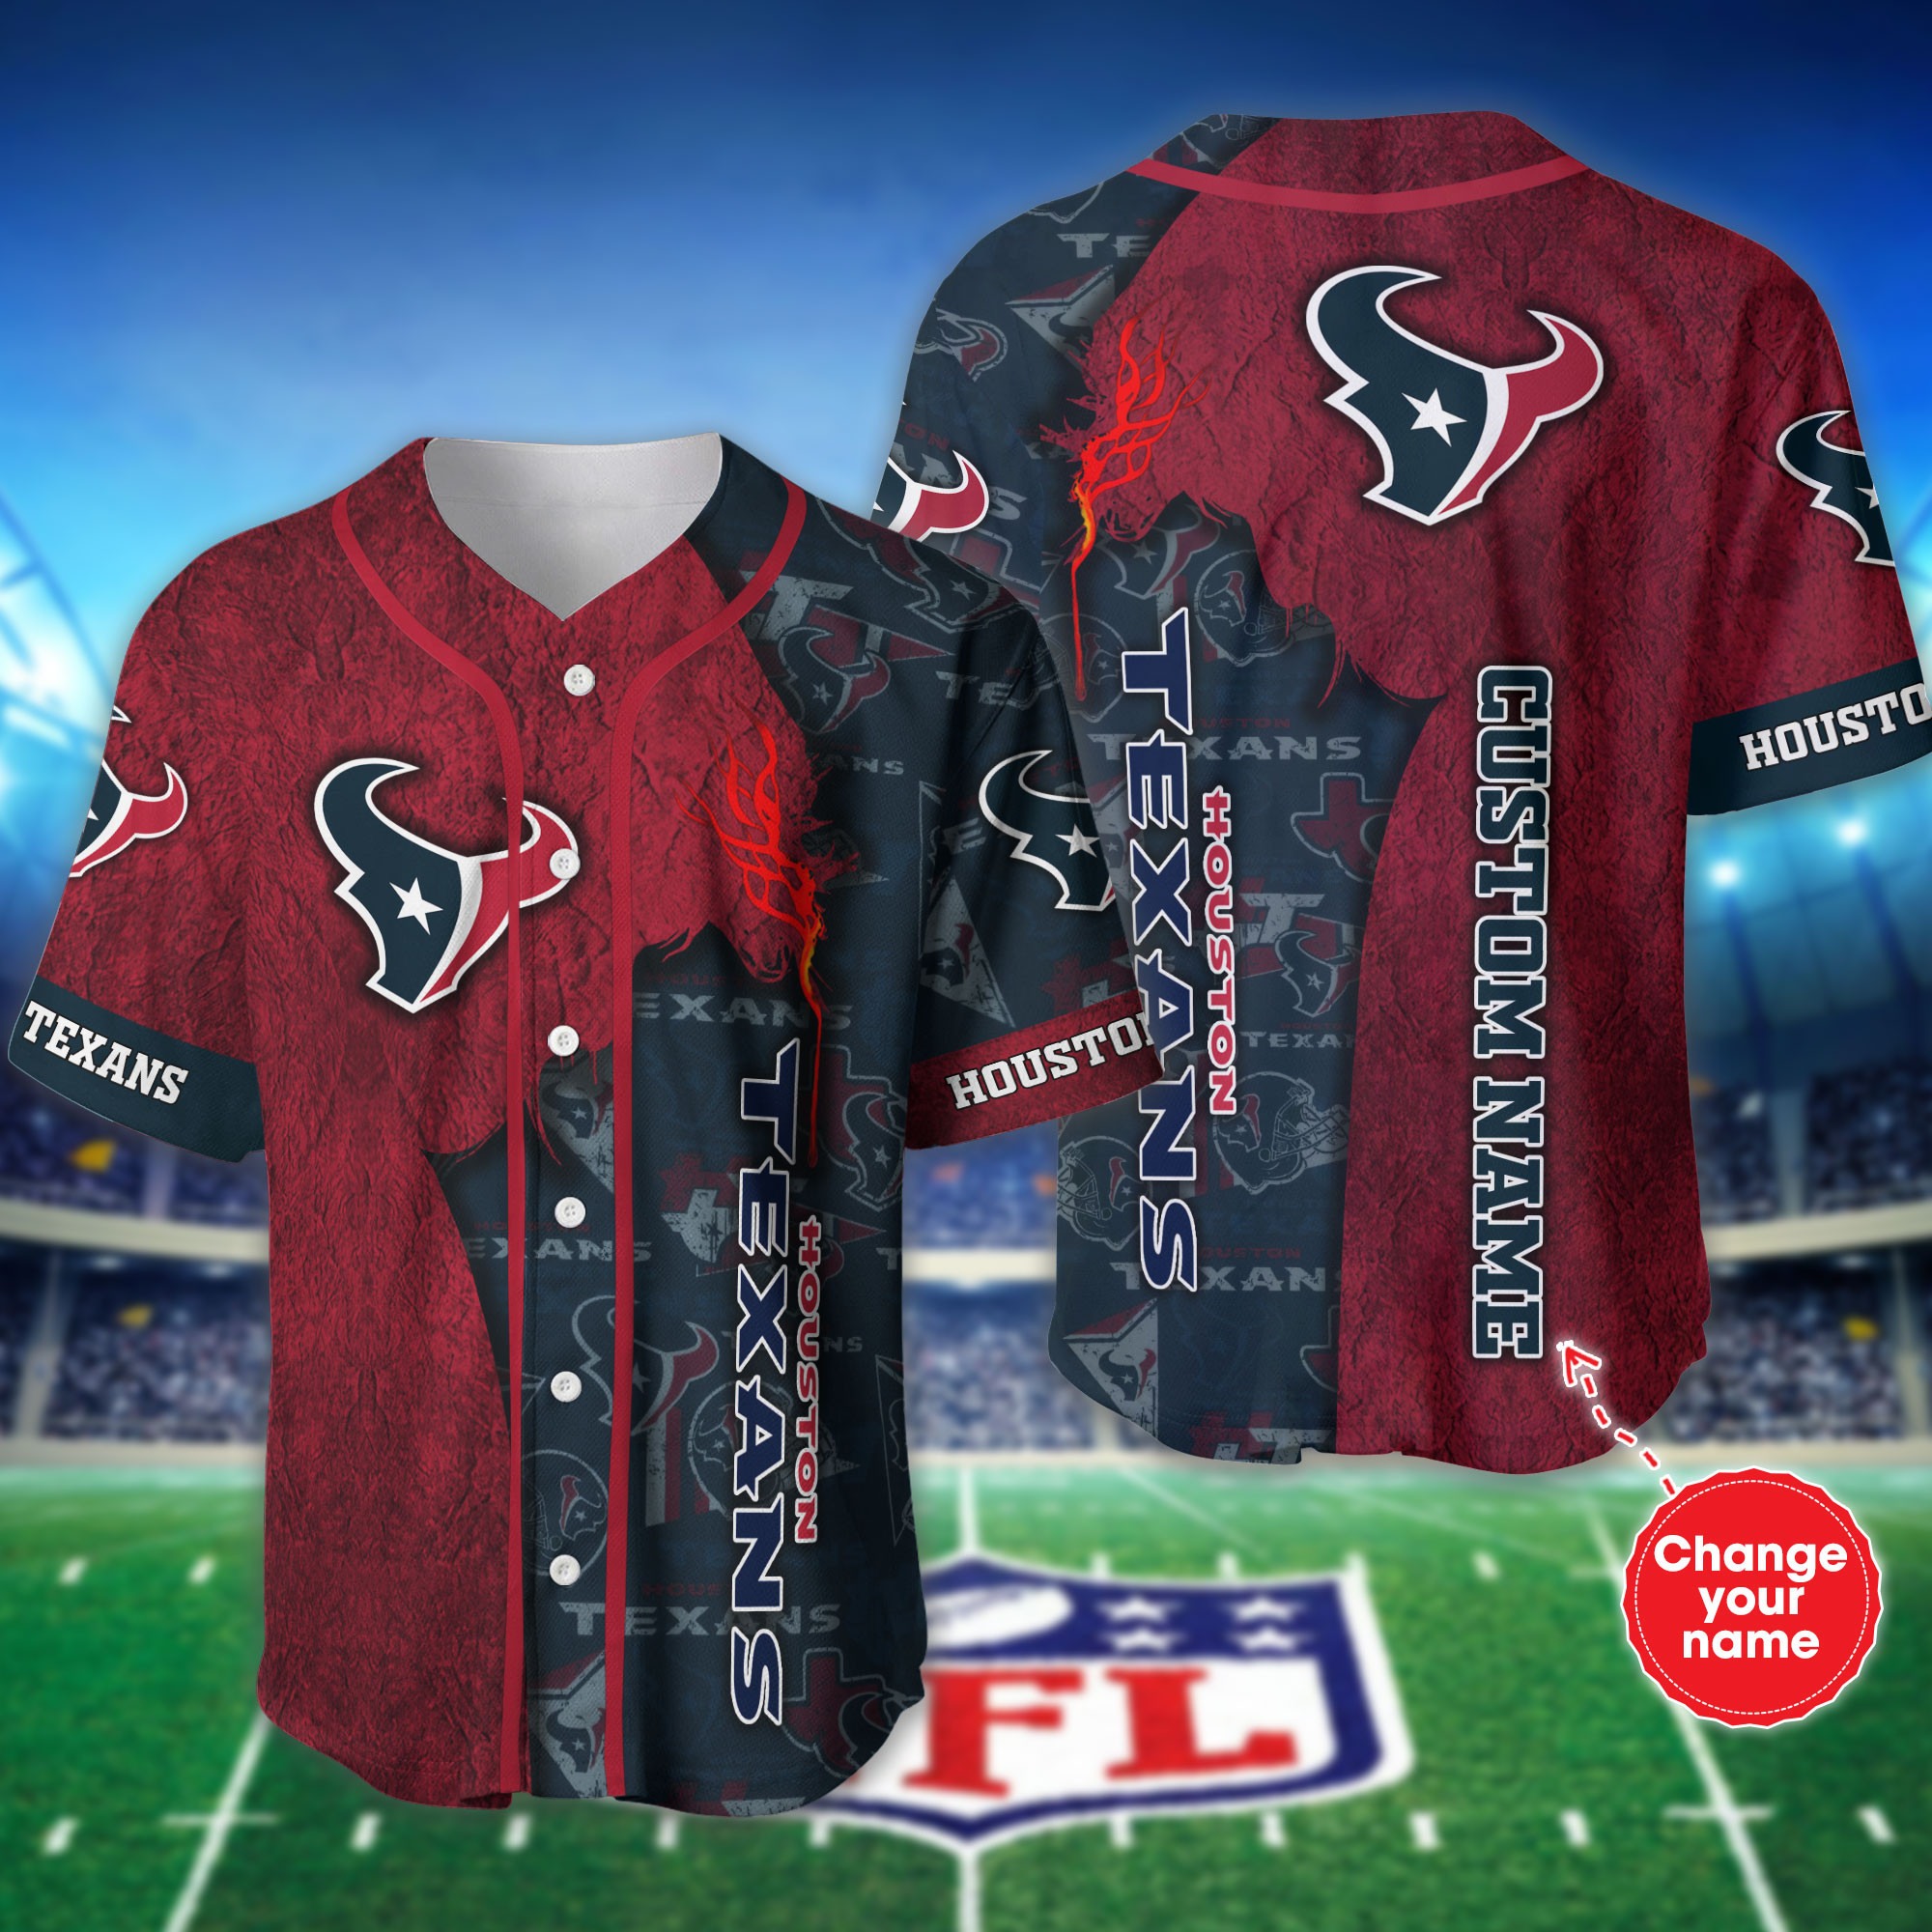 Personalized Houston Texans Baseball Jersey shirt for fans